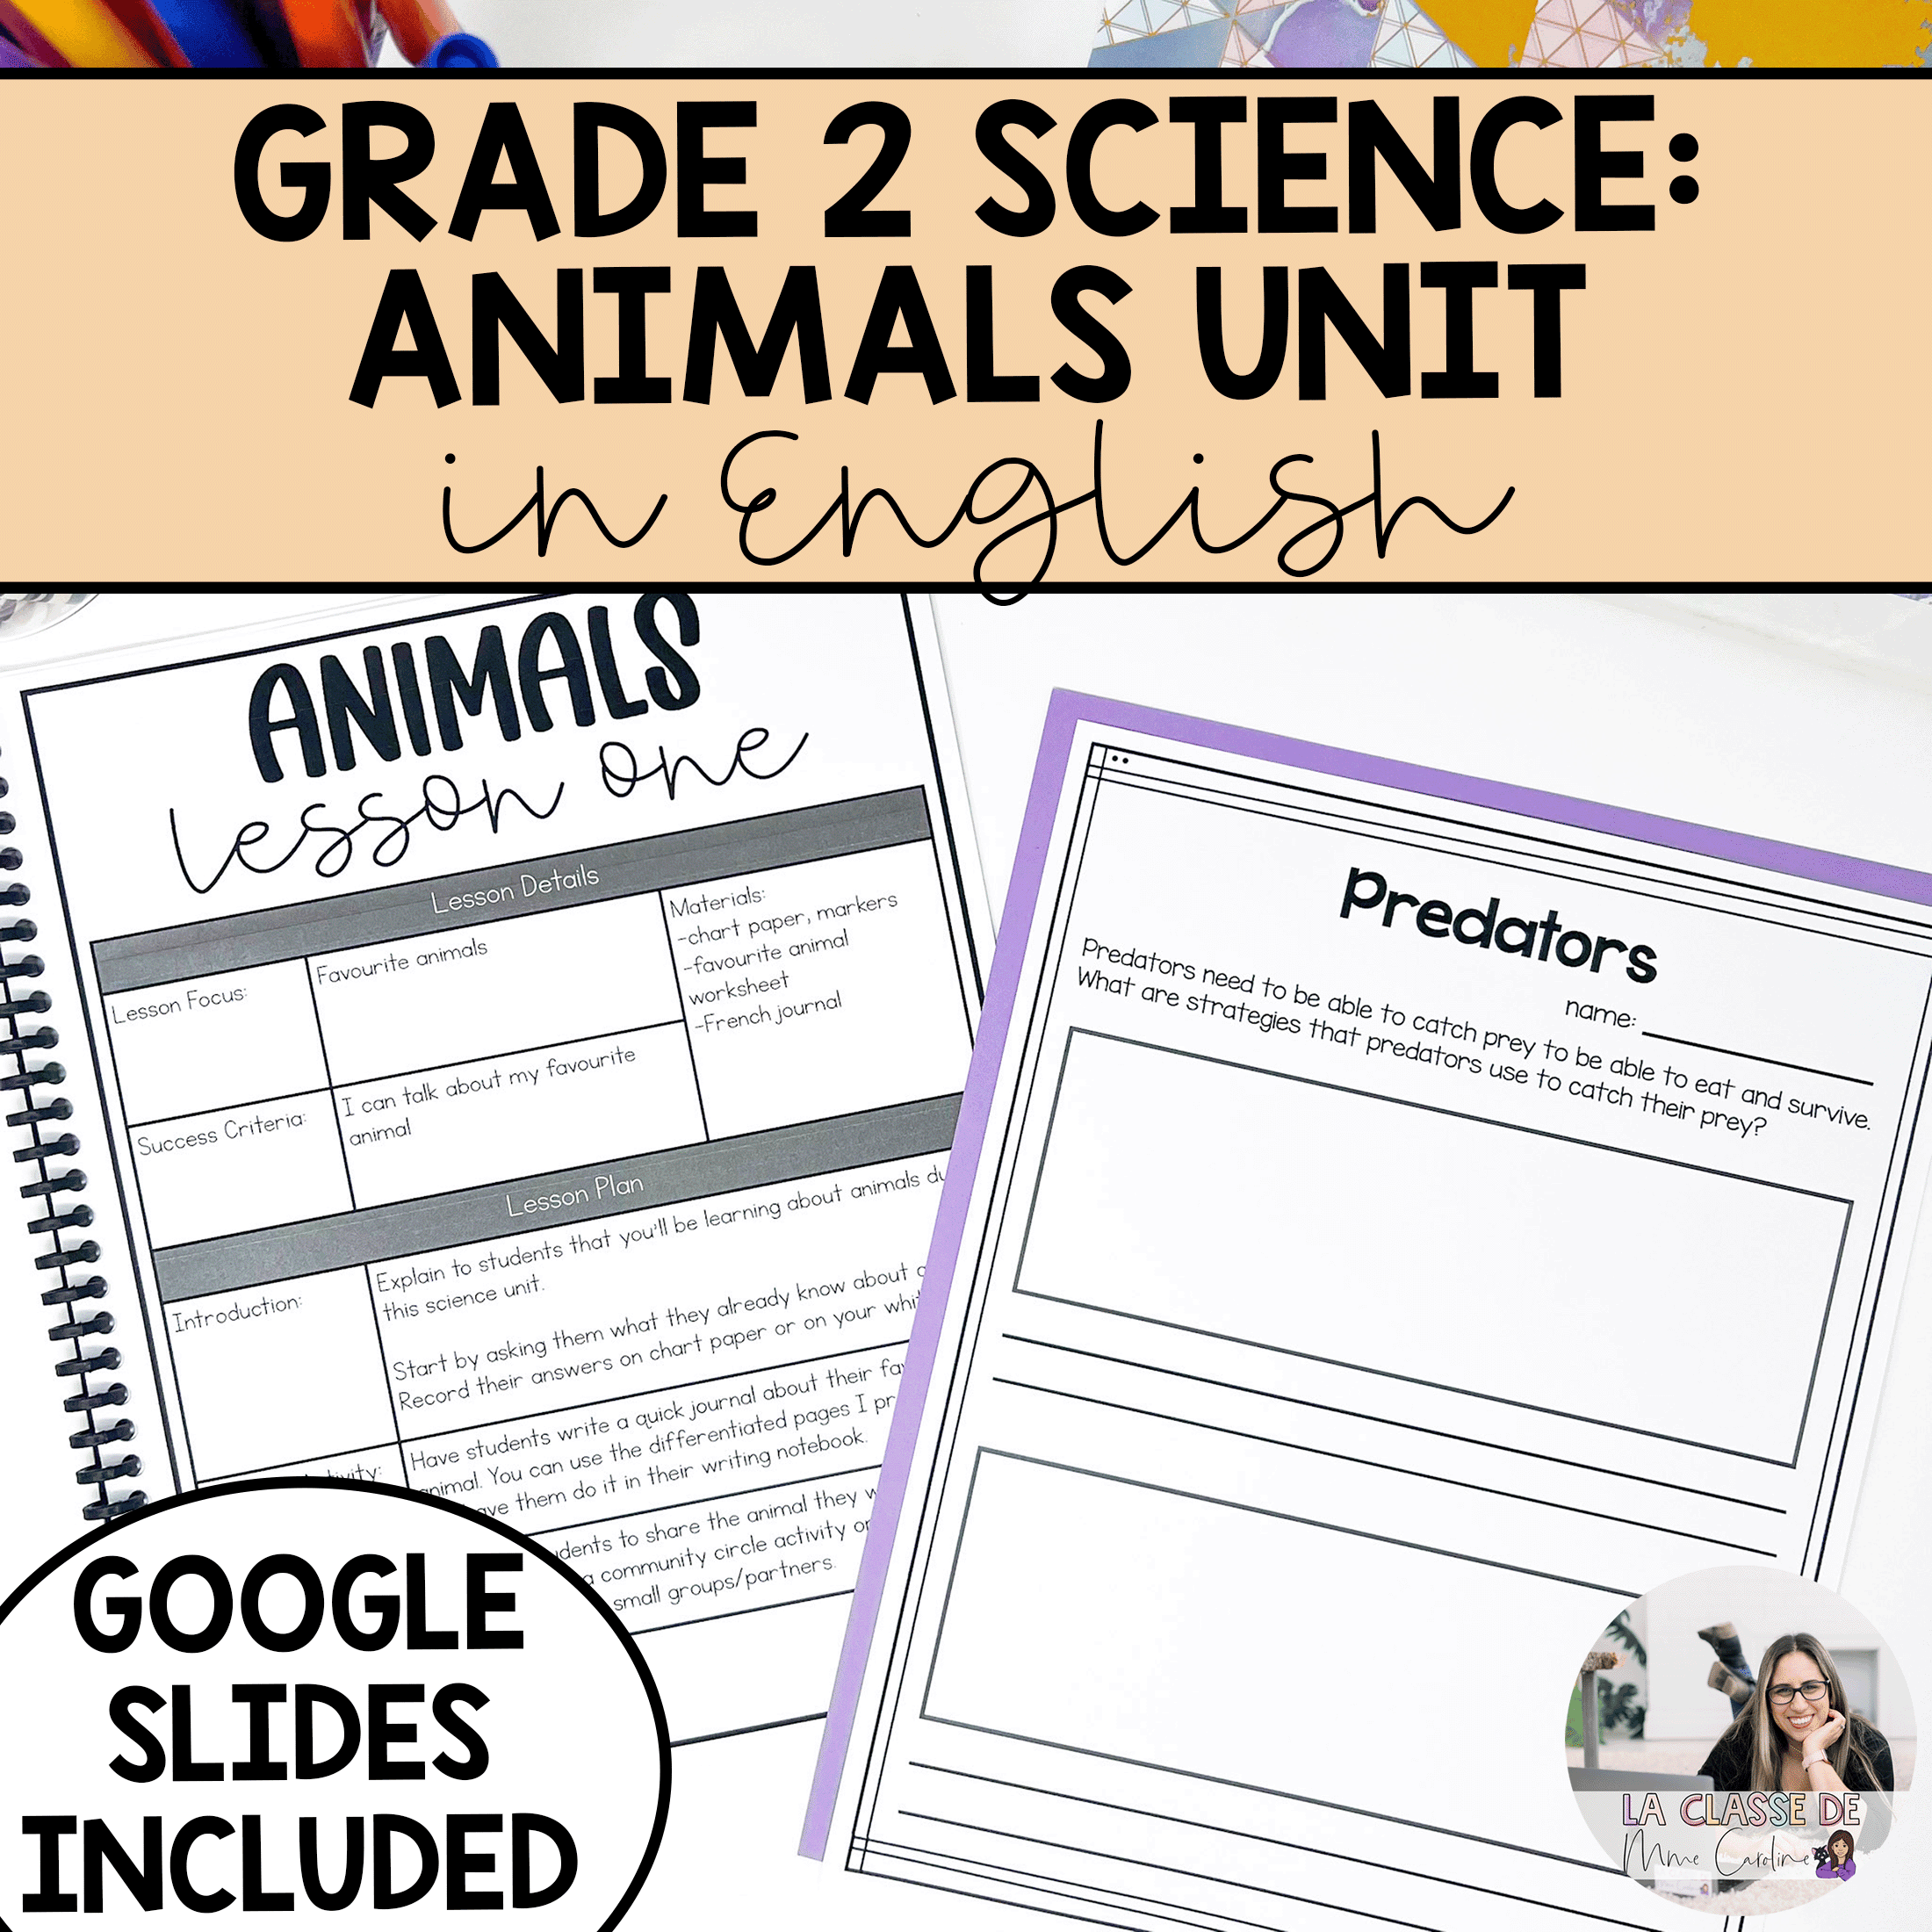 English growth and changes in animals science unit including lesson plans and assessments